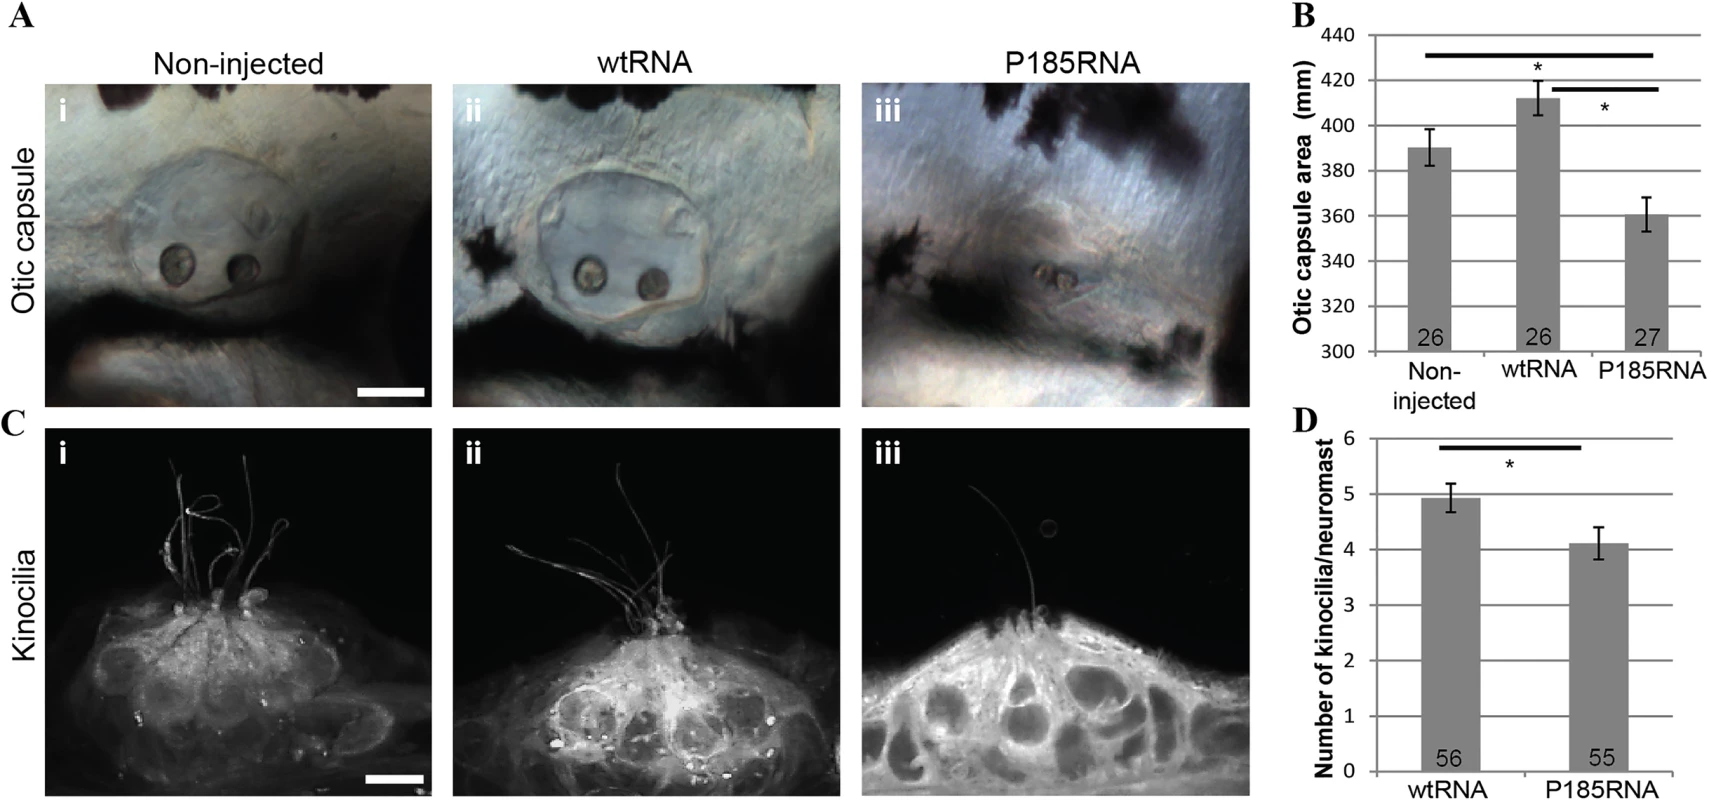 Over-expression of wtRNA and P185RNA in zebrafish embryos.